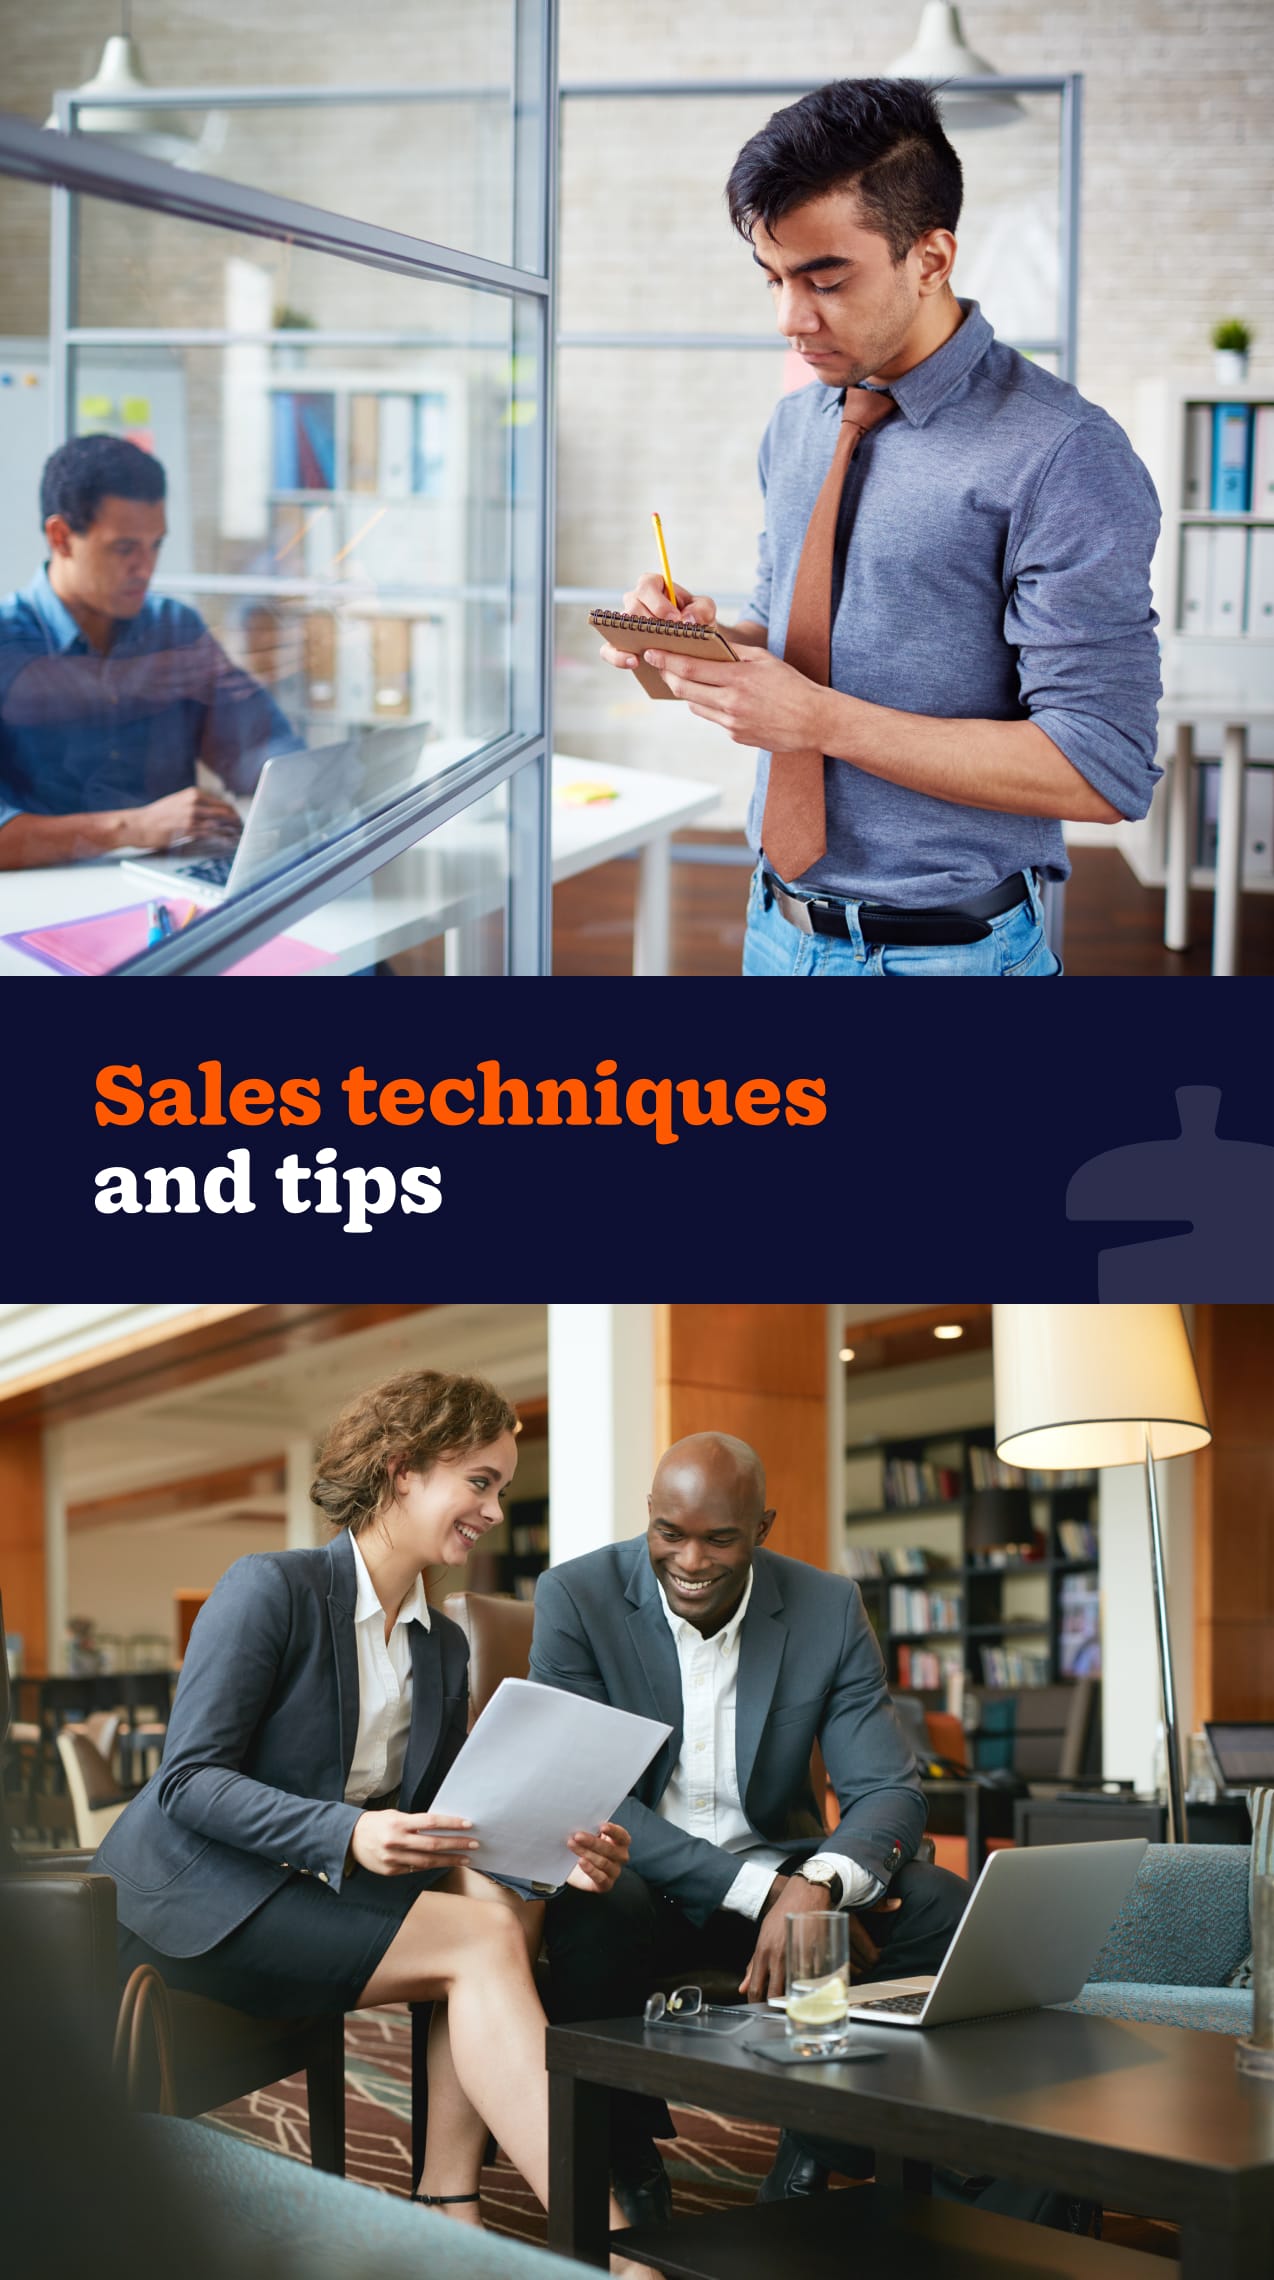 Sales techniques and tips